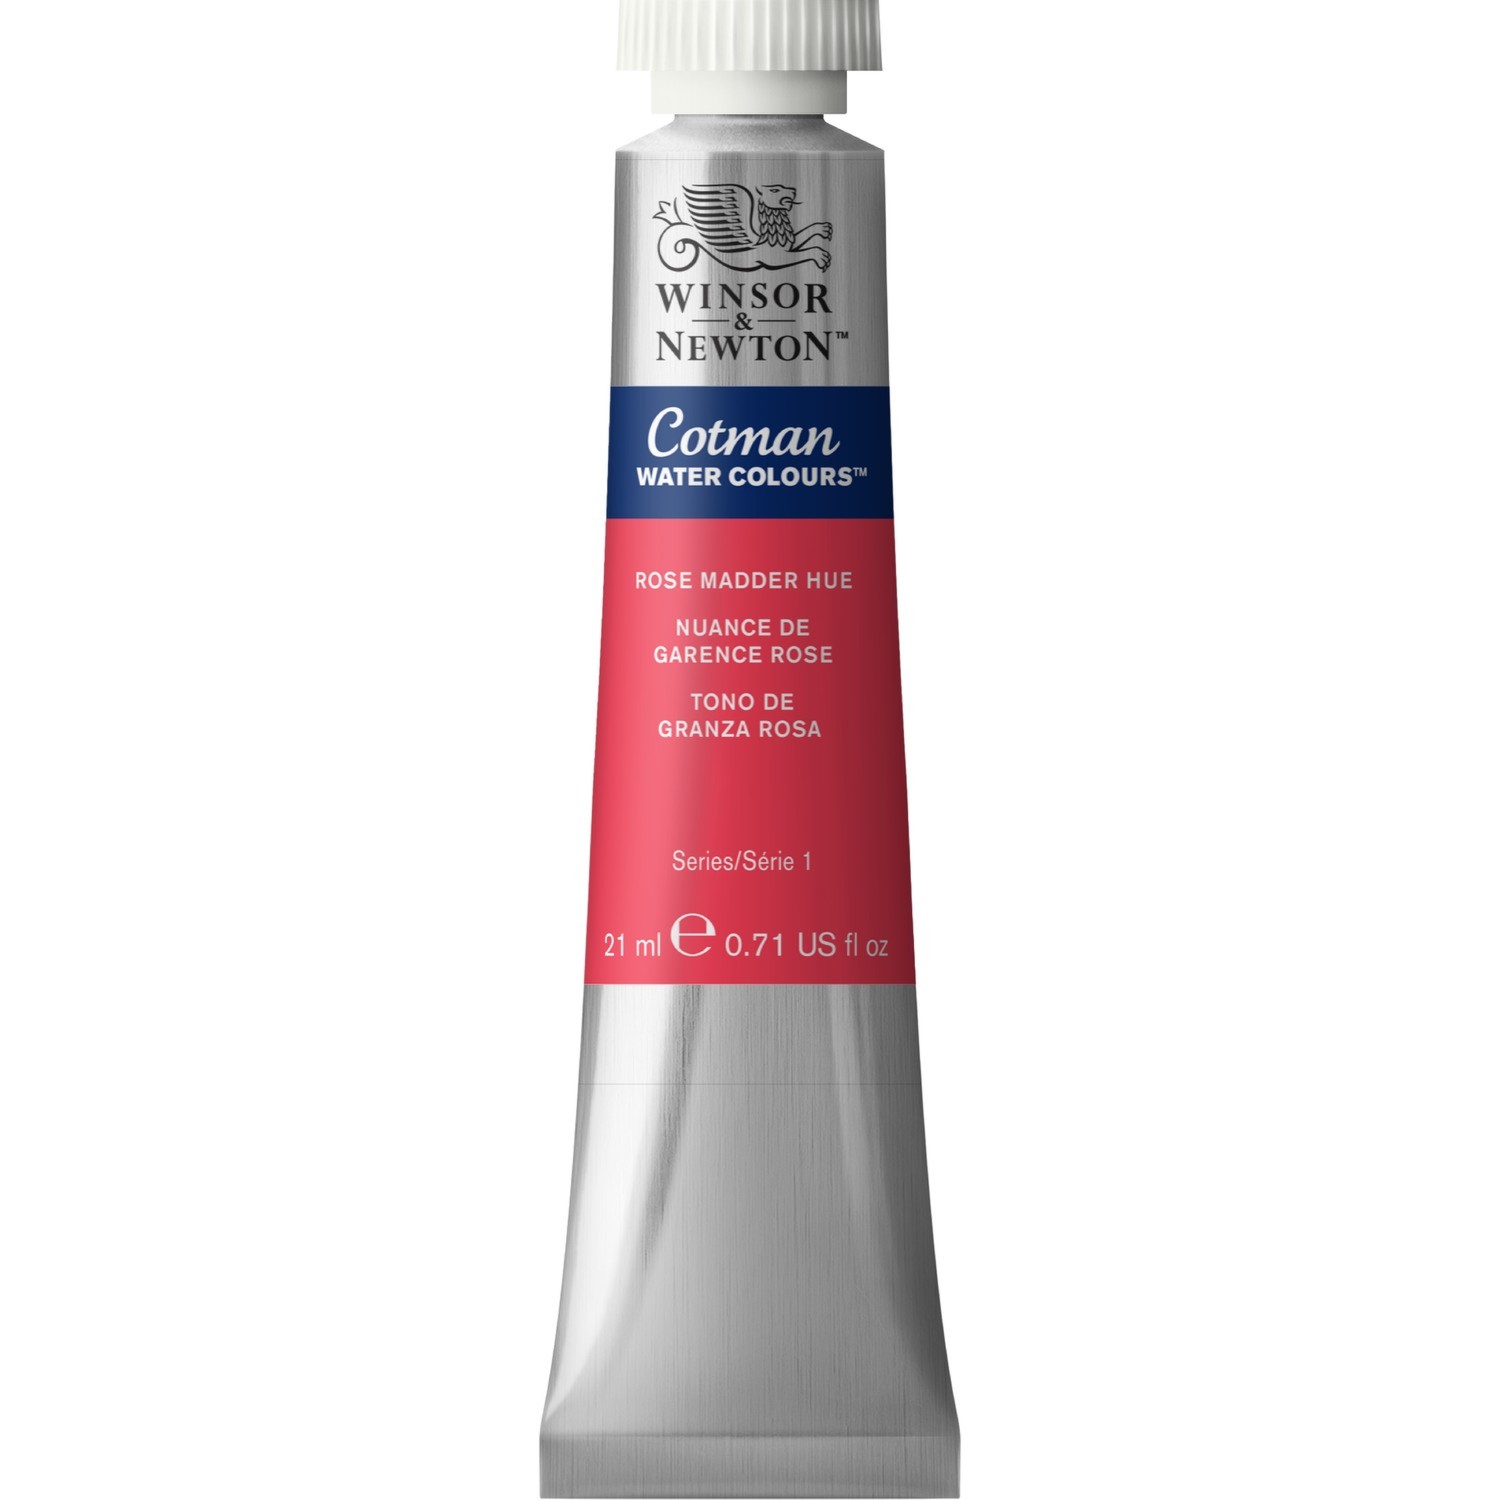 Winsor and Newton Cotman Watercolour Paint 21ml - Rose Madder Image 1